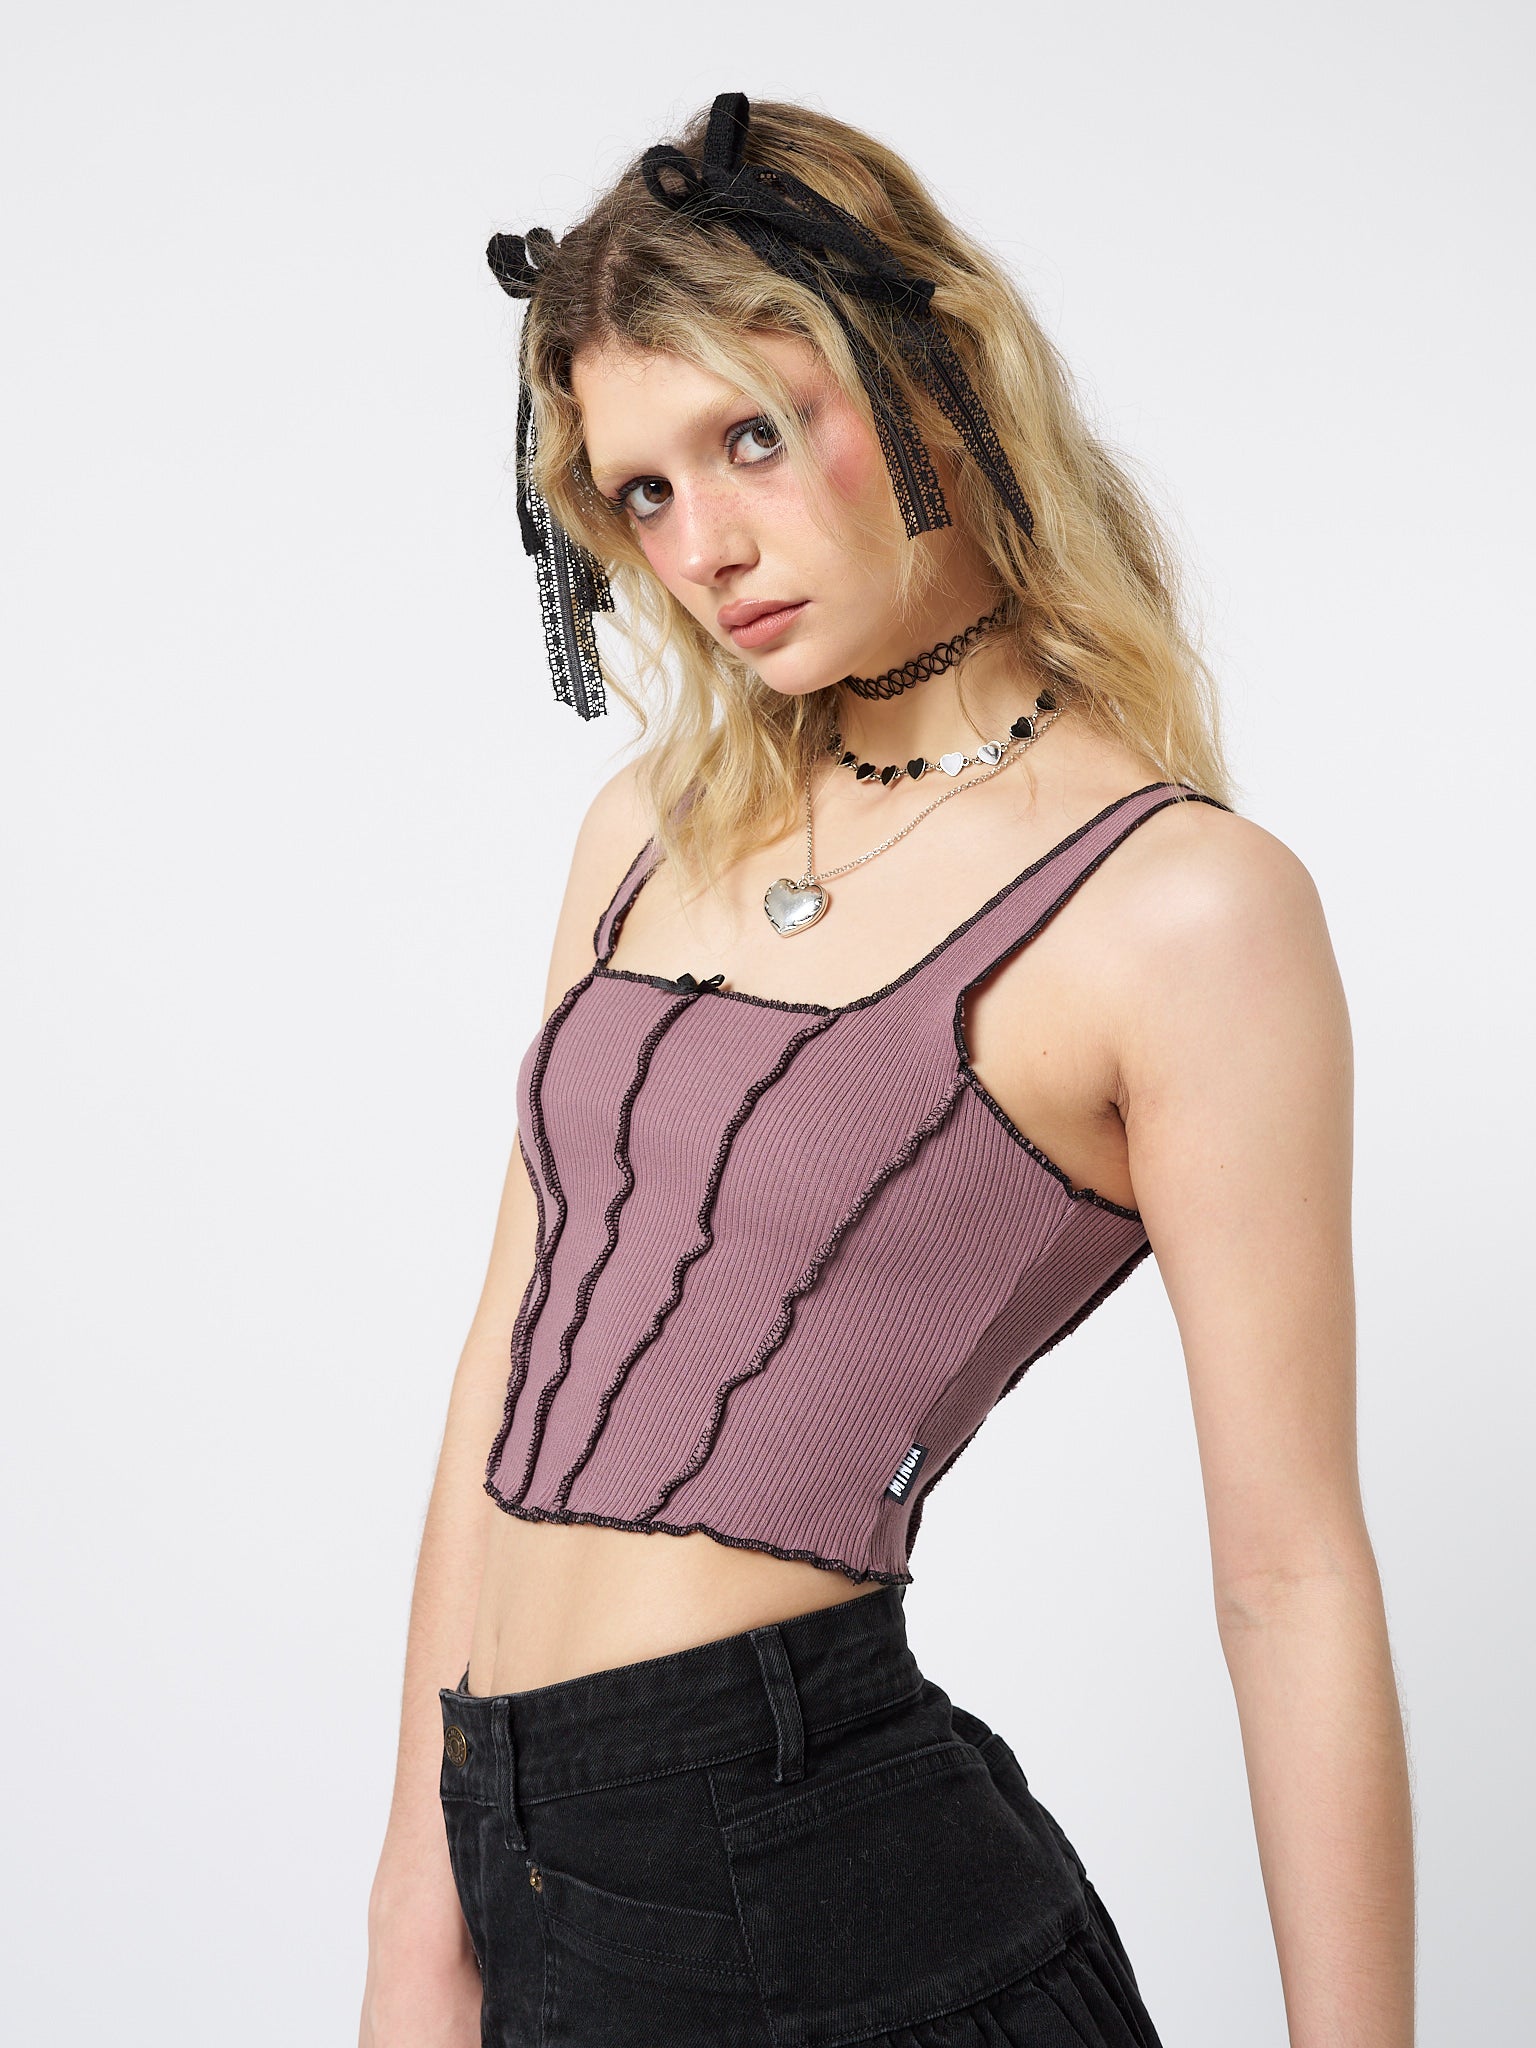 Embrace your dark and feminine side with this edgy pink corset top featuring contrasting stitch details.